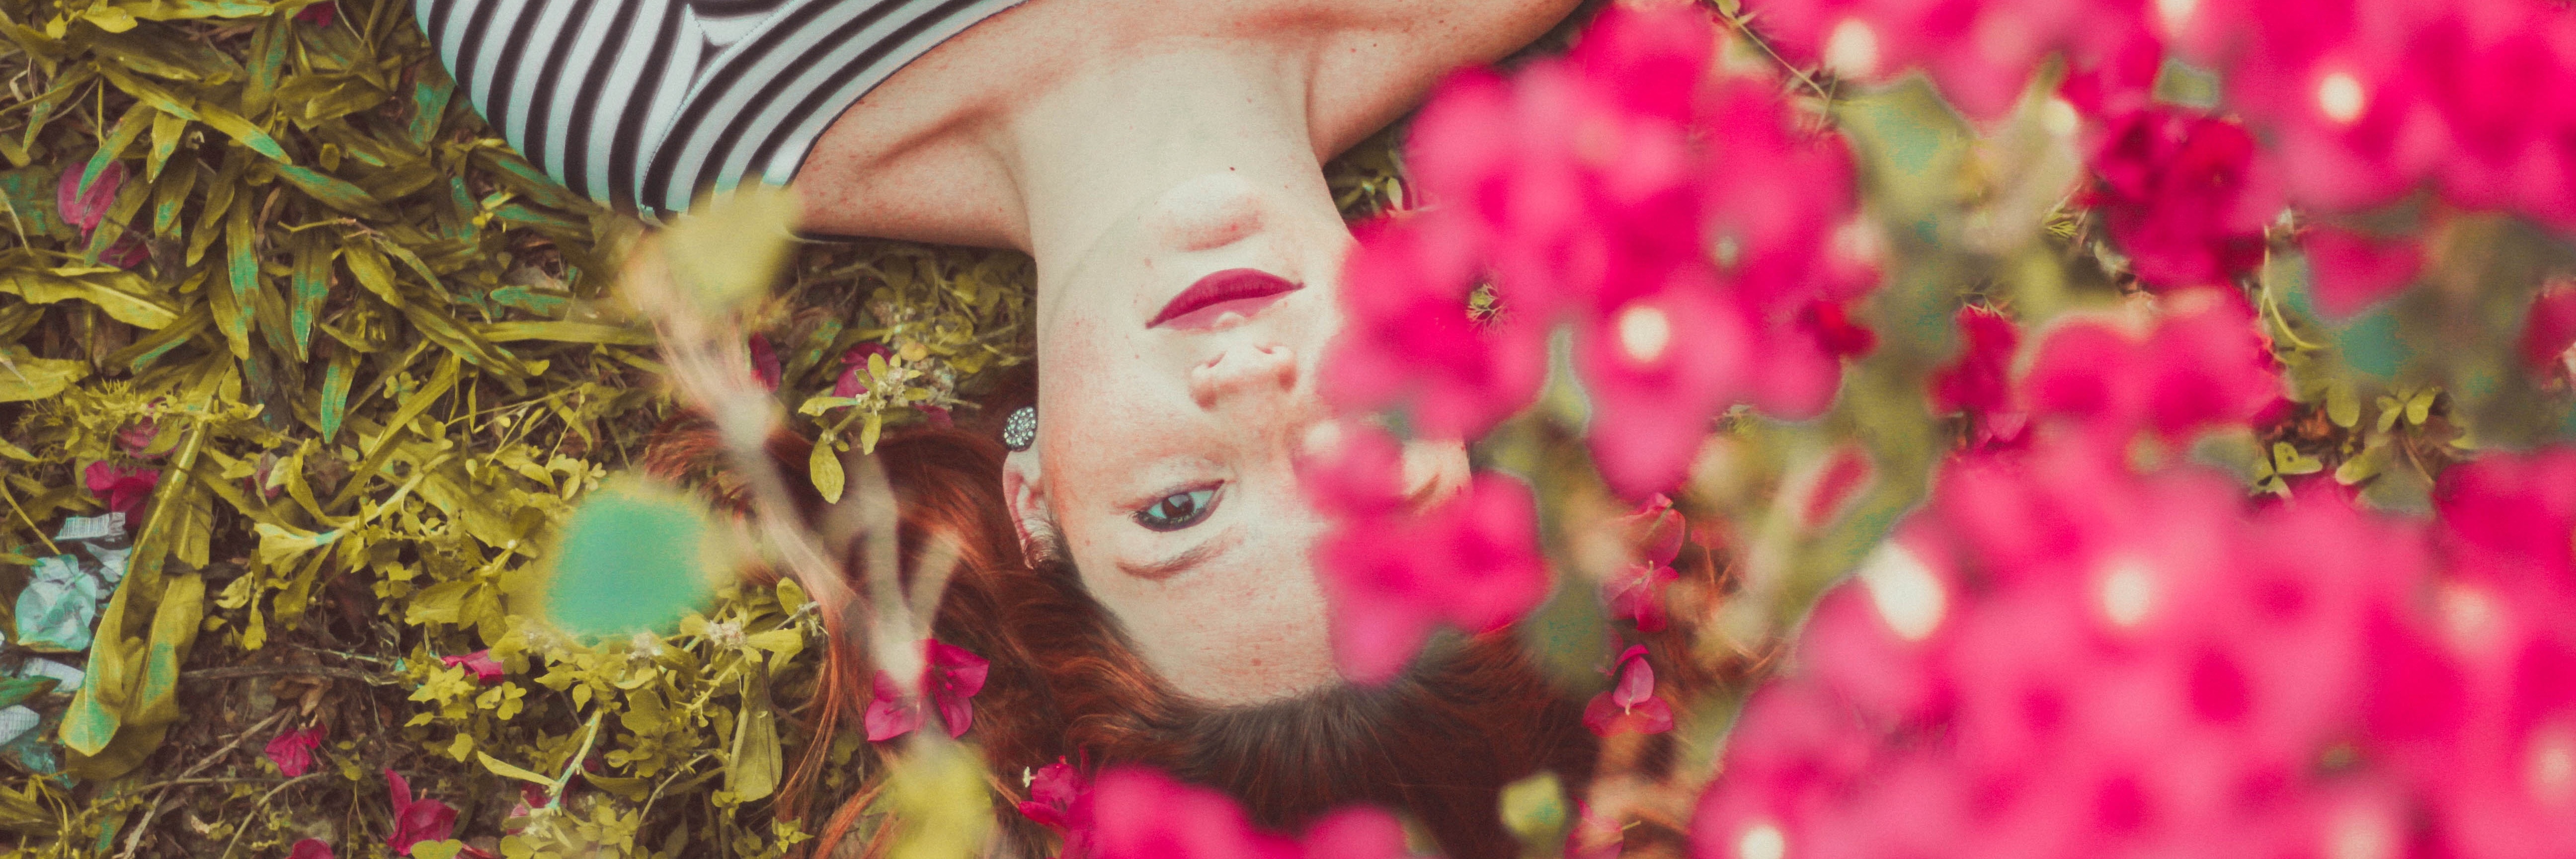 young woman lying among pink flowers in spring garden